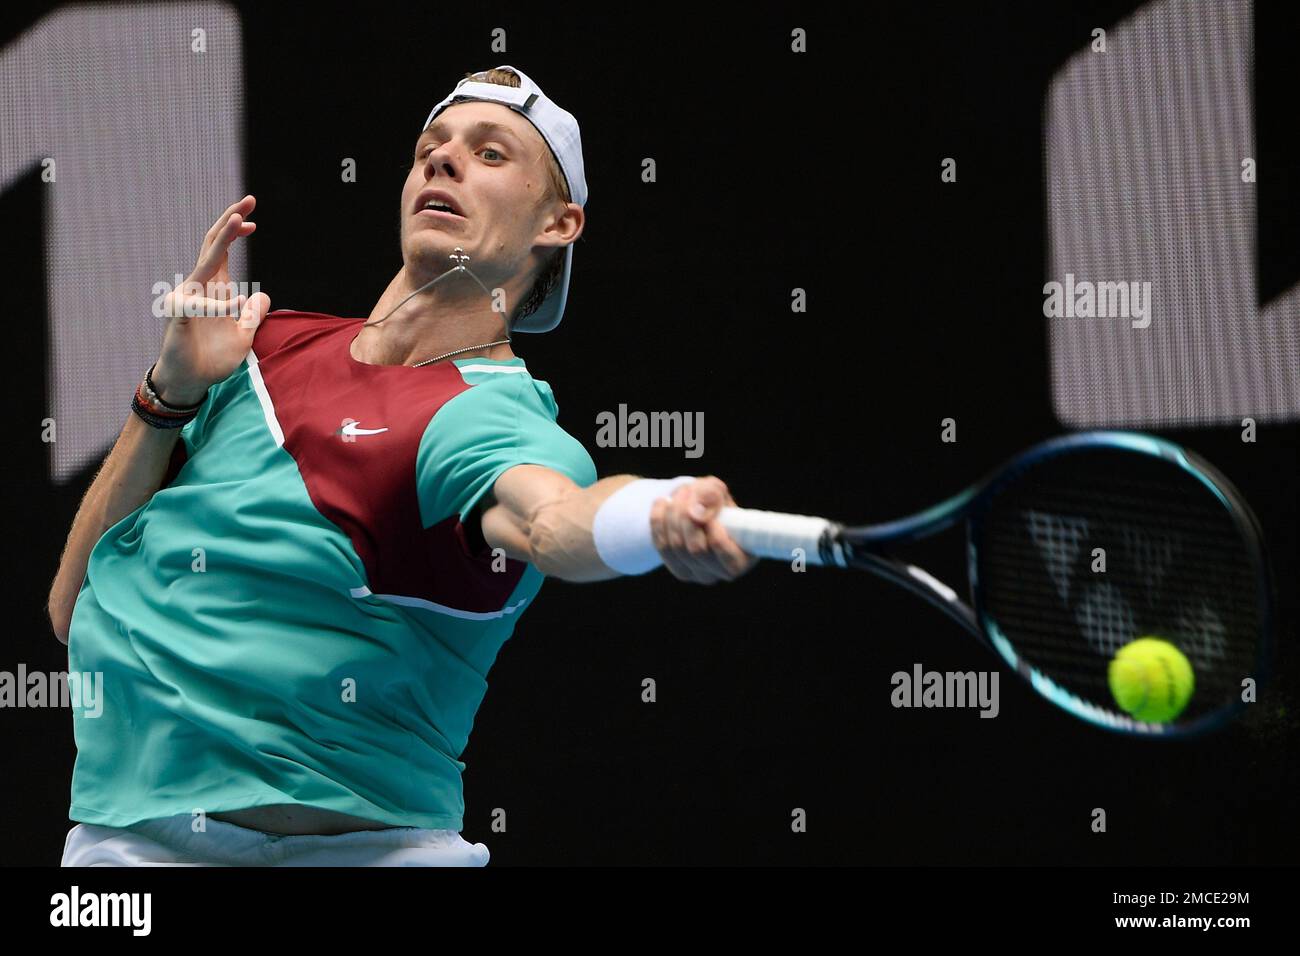 Denis Shapovalov of Canada plays a forehand return to Laslo Djere of Serbia during their first round match at the Australian Open tennis championships in Melbourne, Australia, Monday, Jan